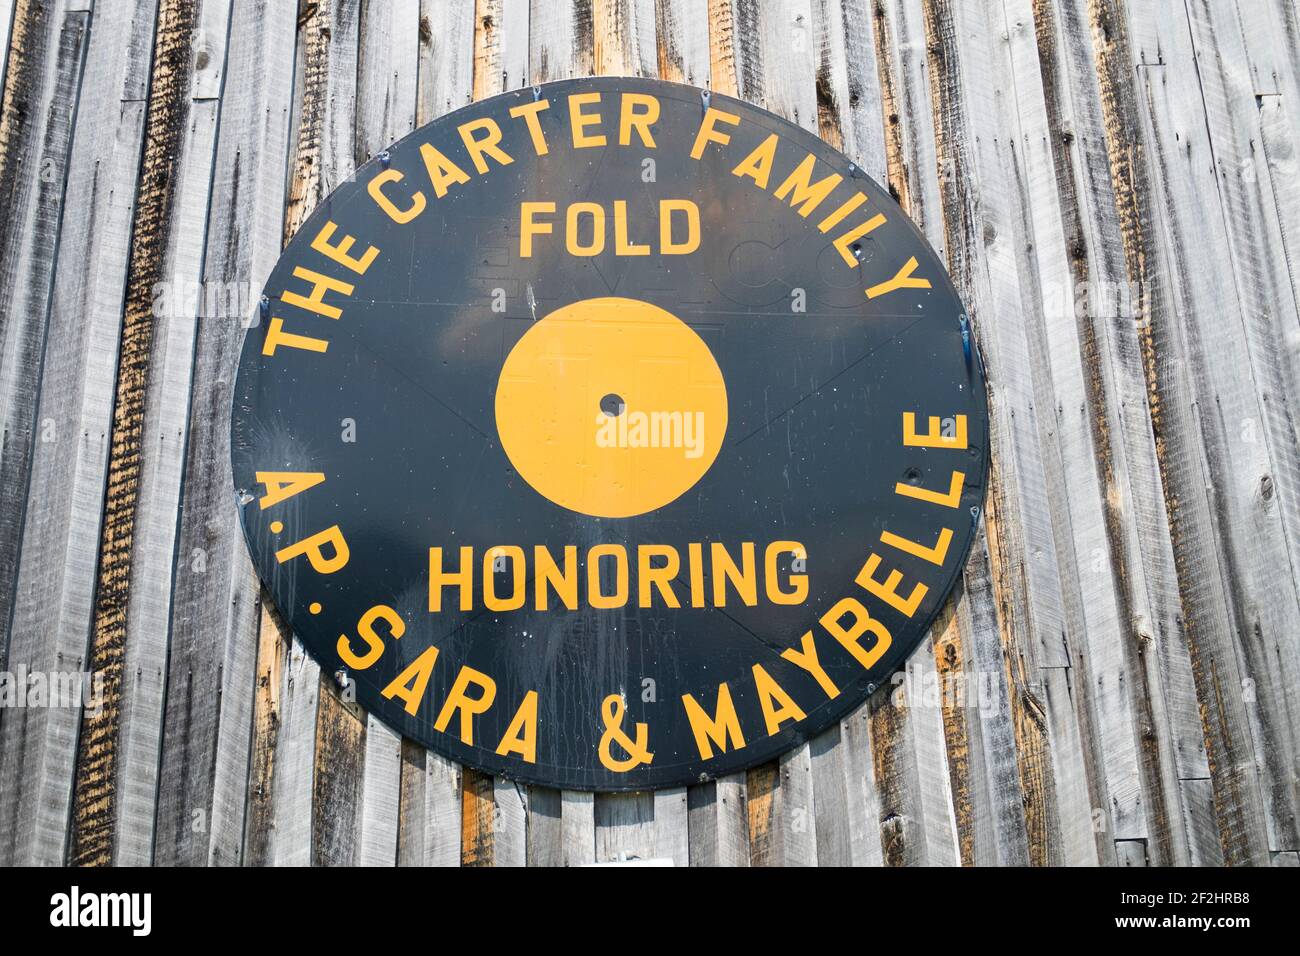 The record album sign for the Carter Family Fold, an entertainment site for country music. In Maces Spring, Hiltons, Virginia. Stock Photo